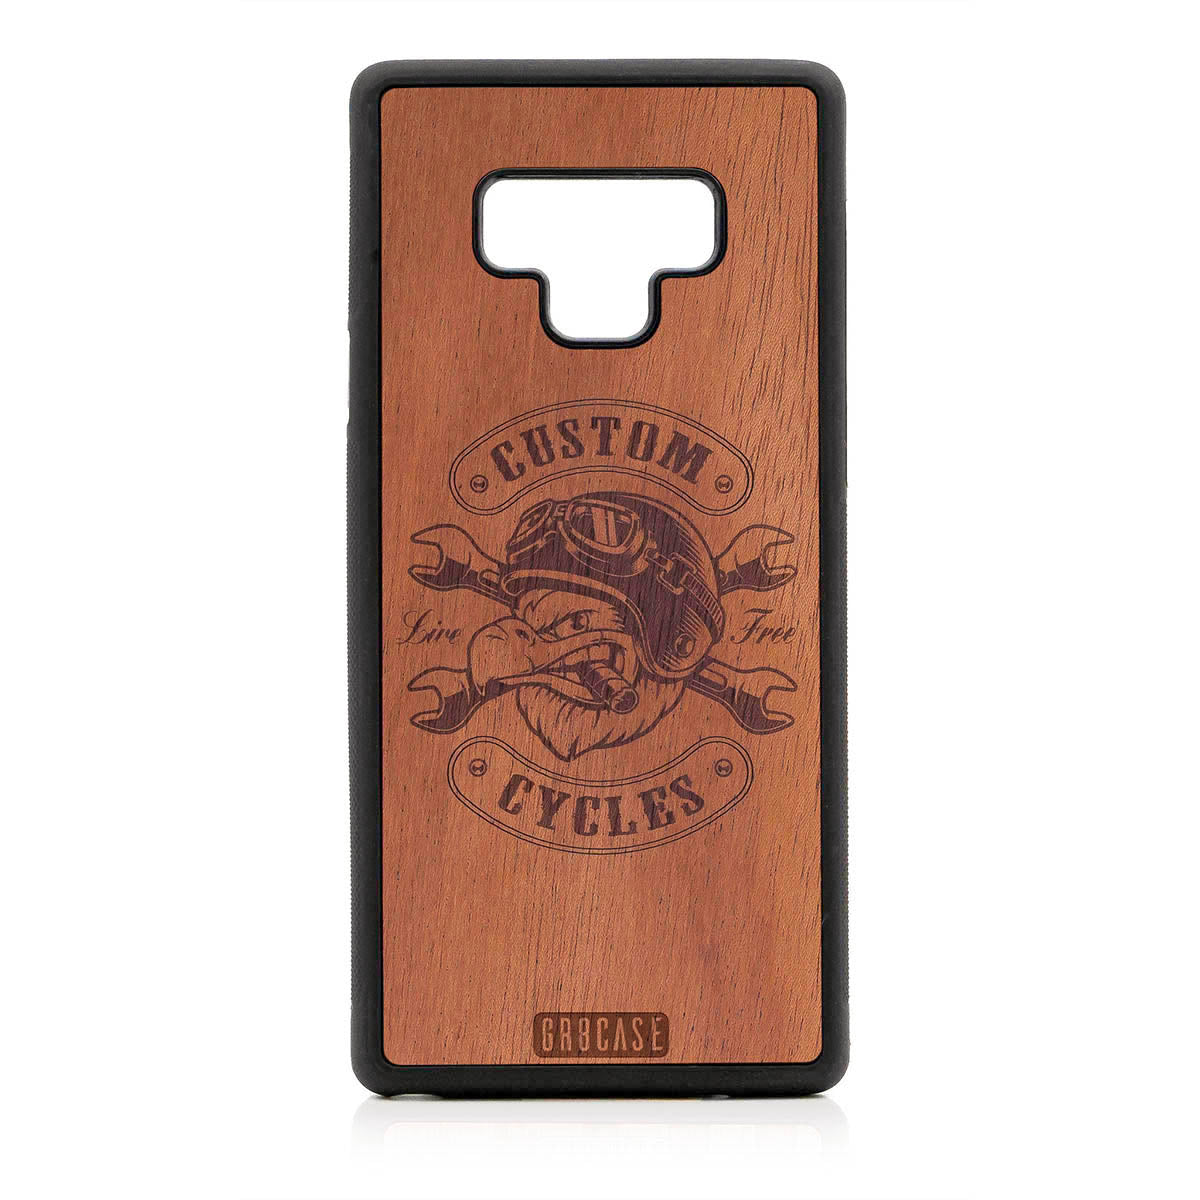 Custom Cycles Live Free (Biker Eagle) Design Wood Case For Samsung Galaxy Note 9 by GR8CASE